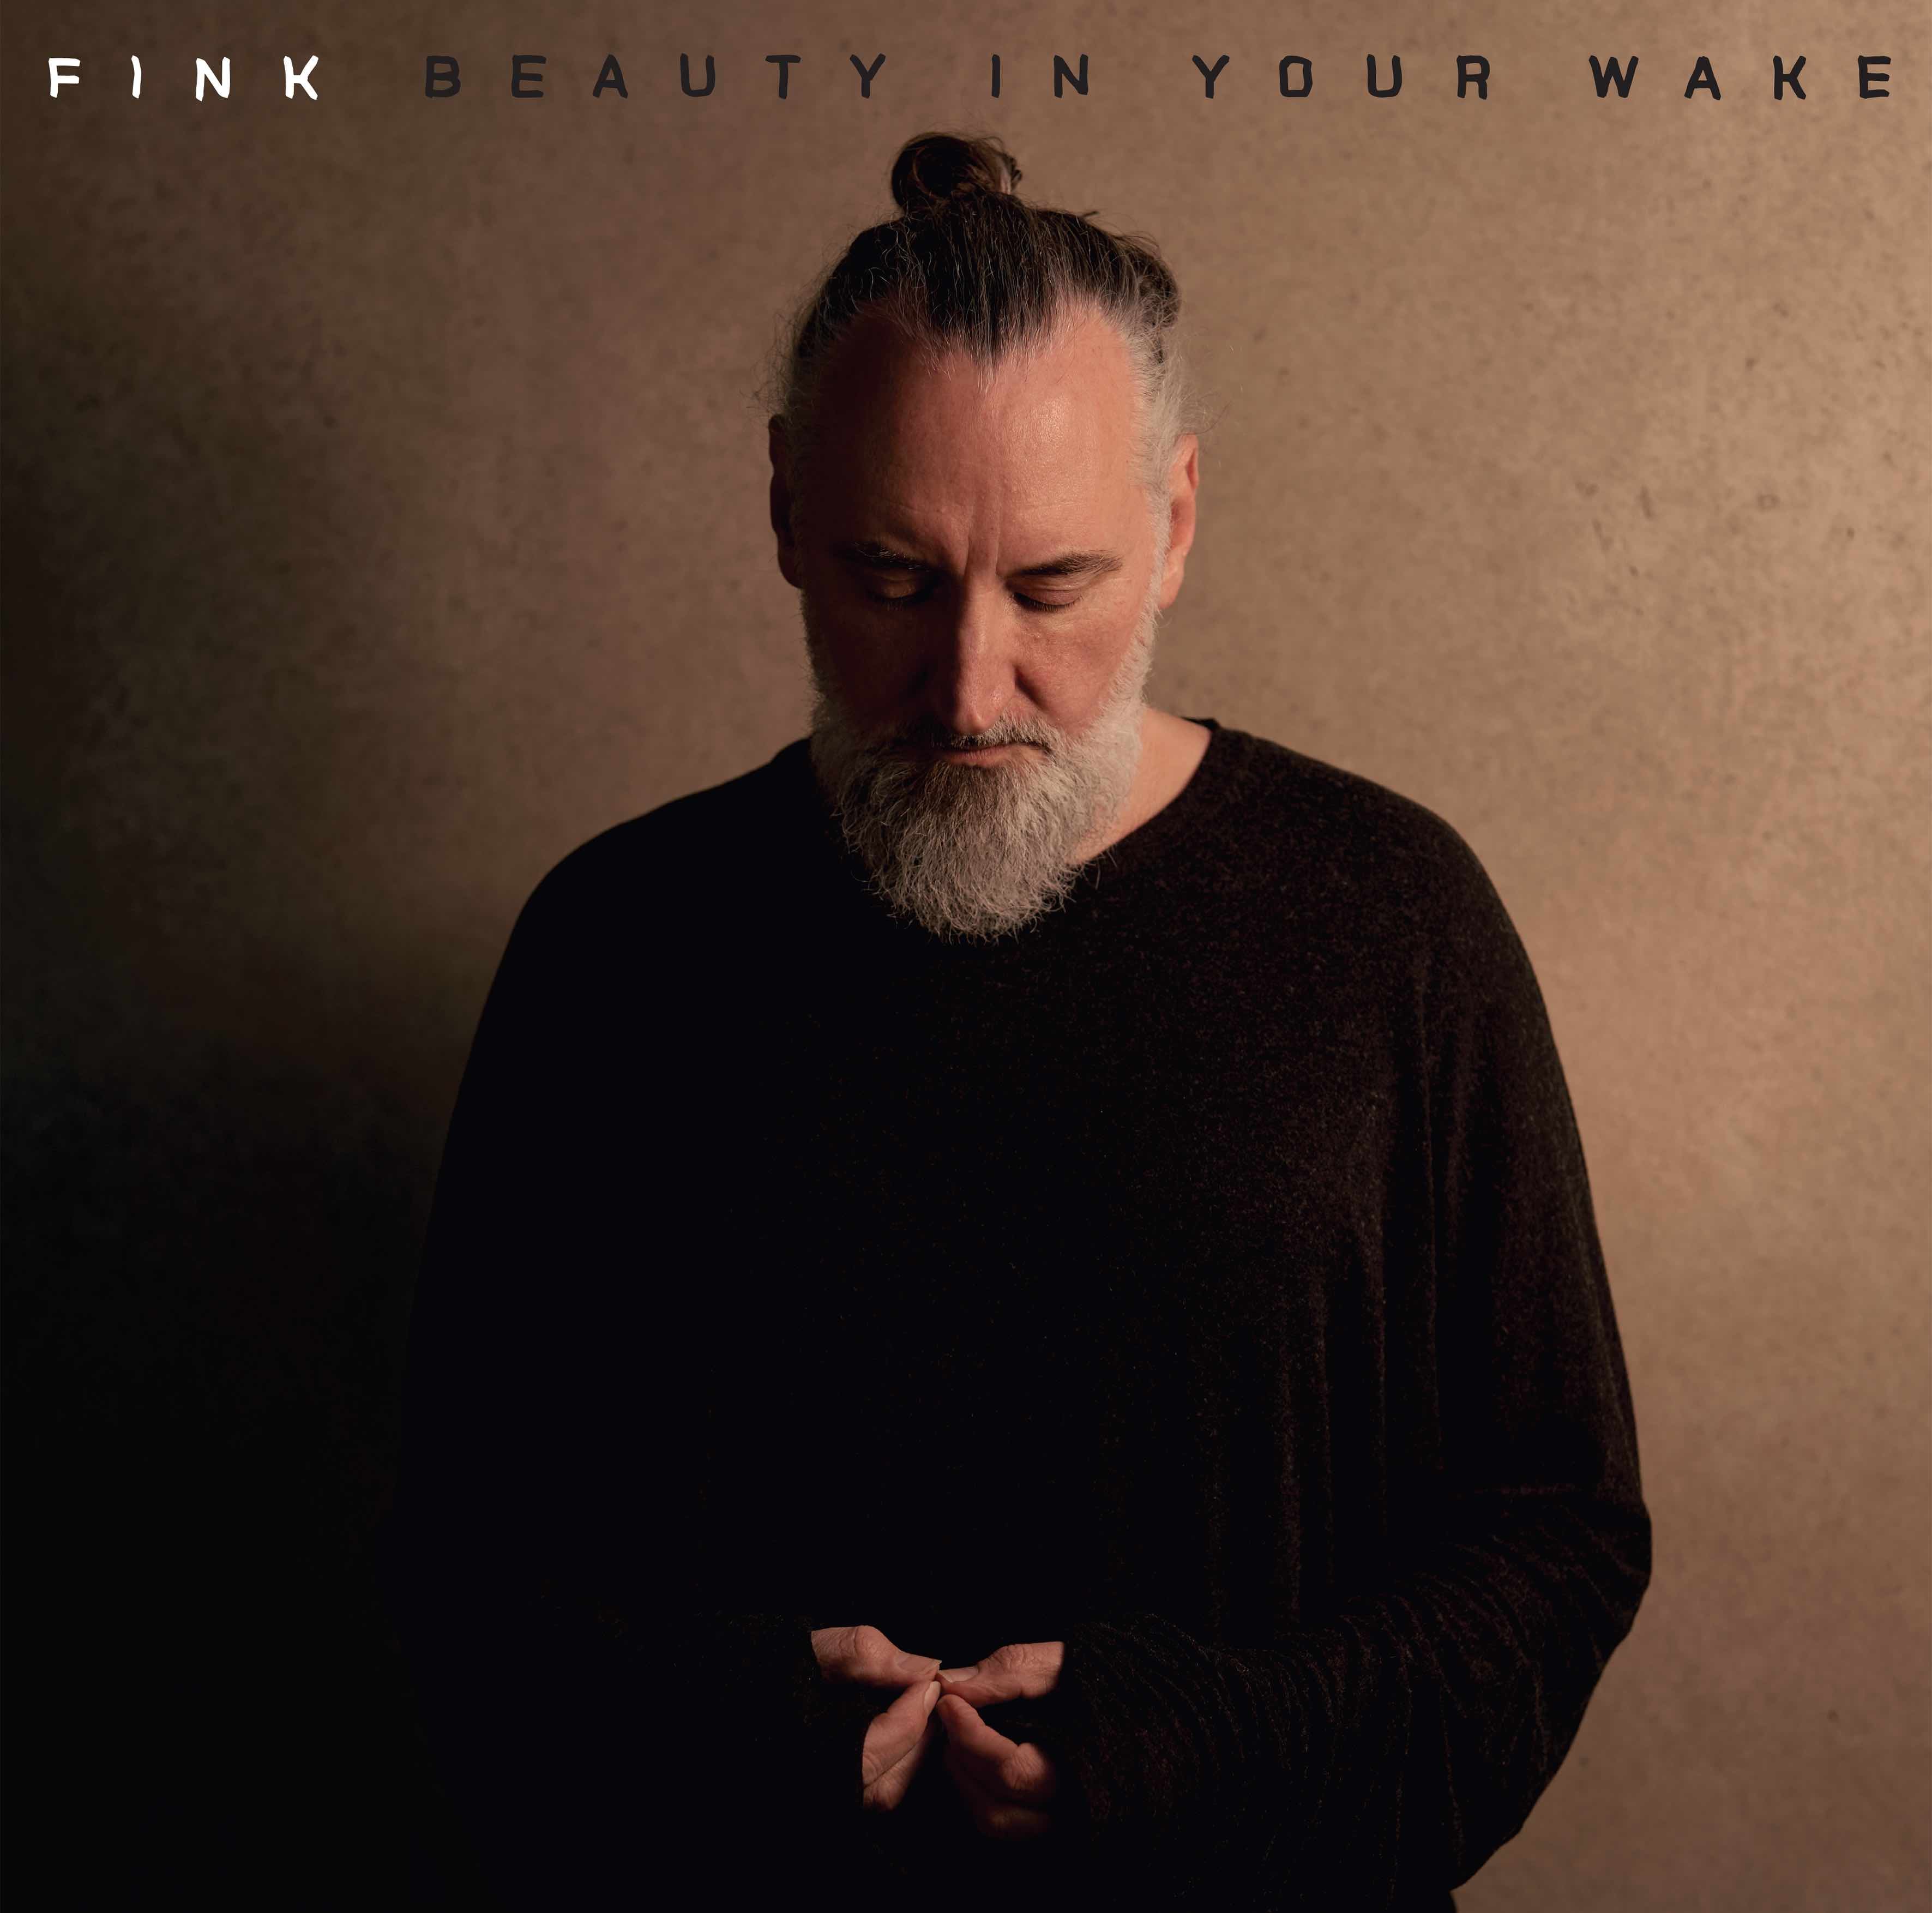 Fink - Beauty In Your Wake: Limited 'Cornish' Blue Vinyl LP